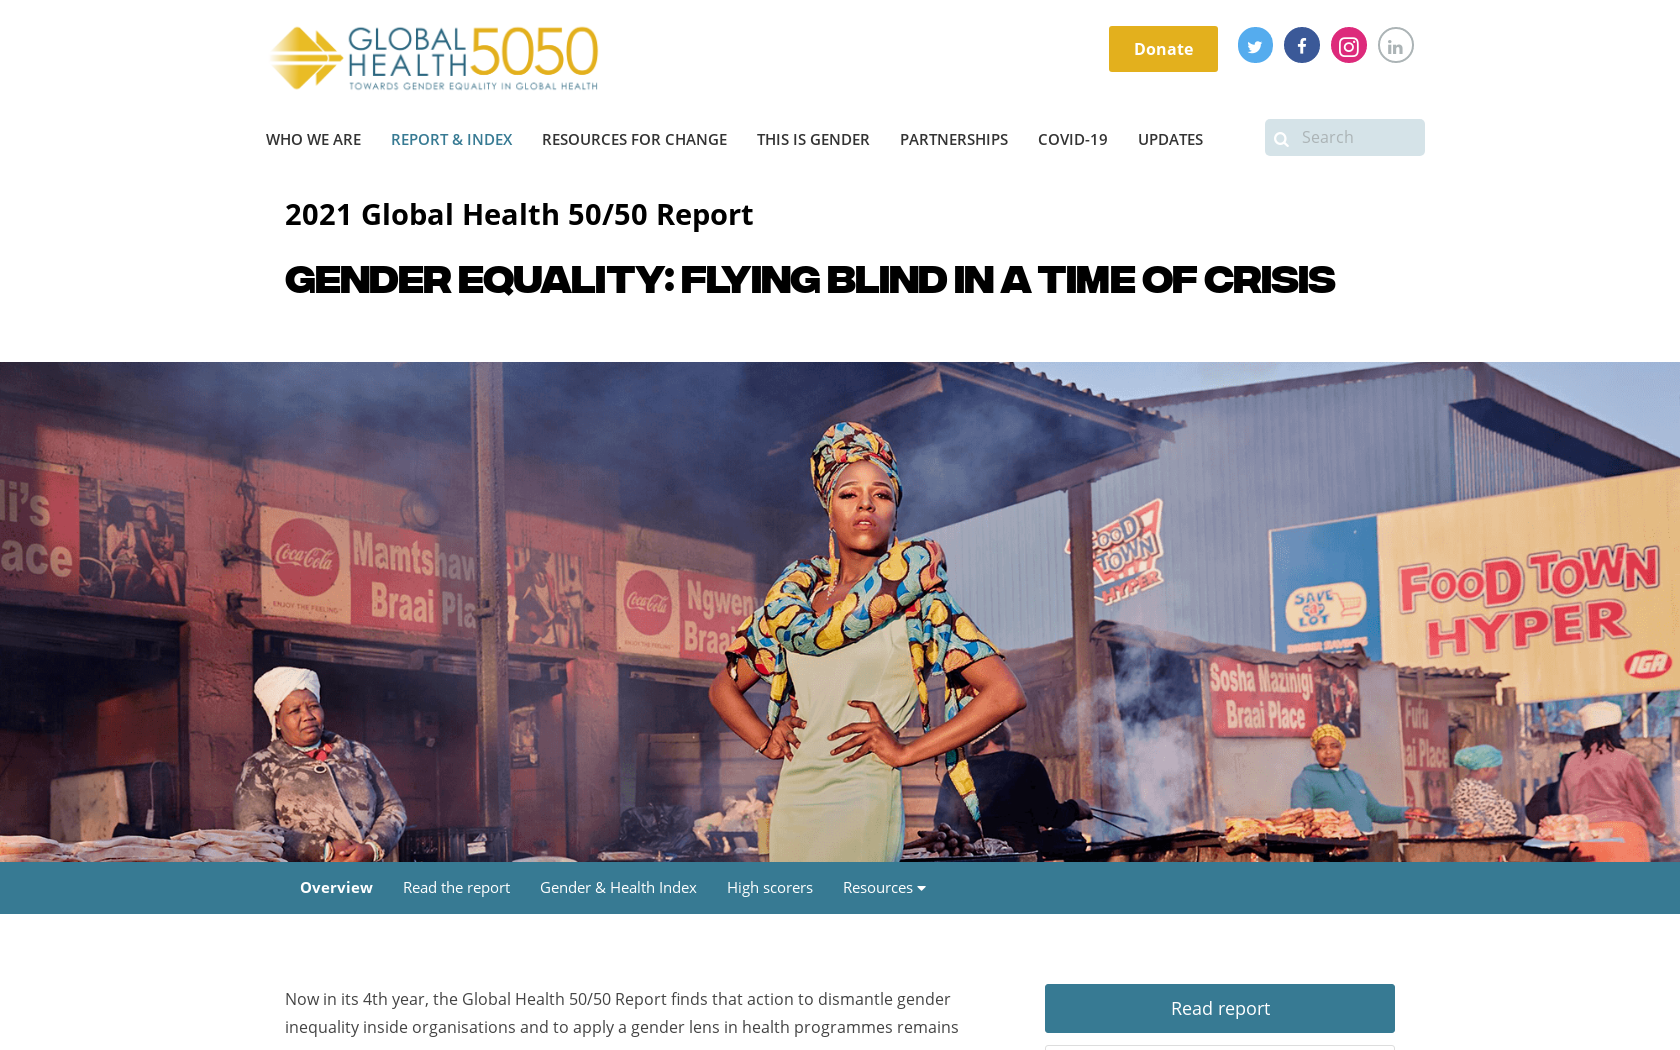 Gender Equality: Flying blind in a time of crisis (The 2021 Global Health 50/50 report)